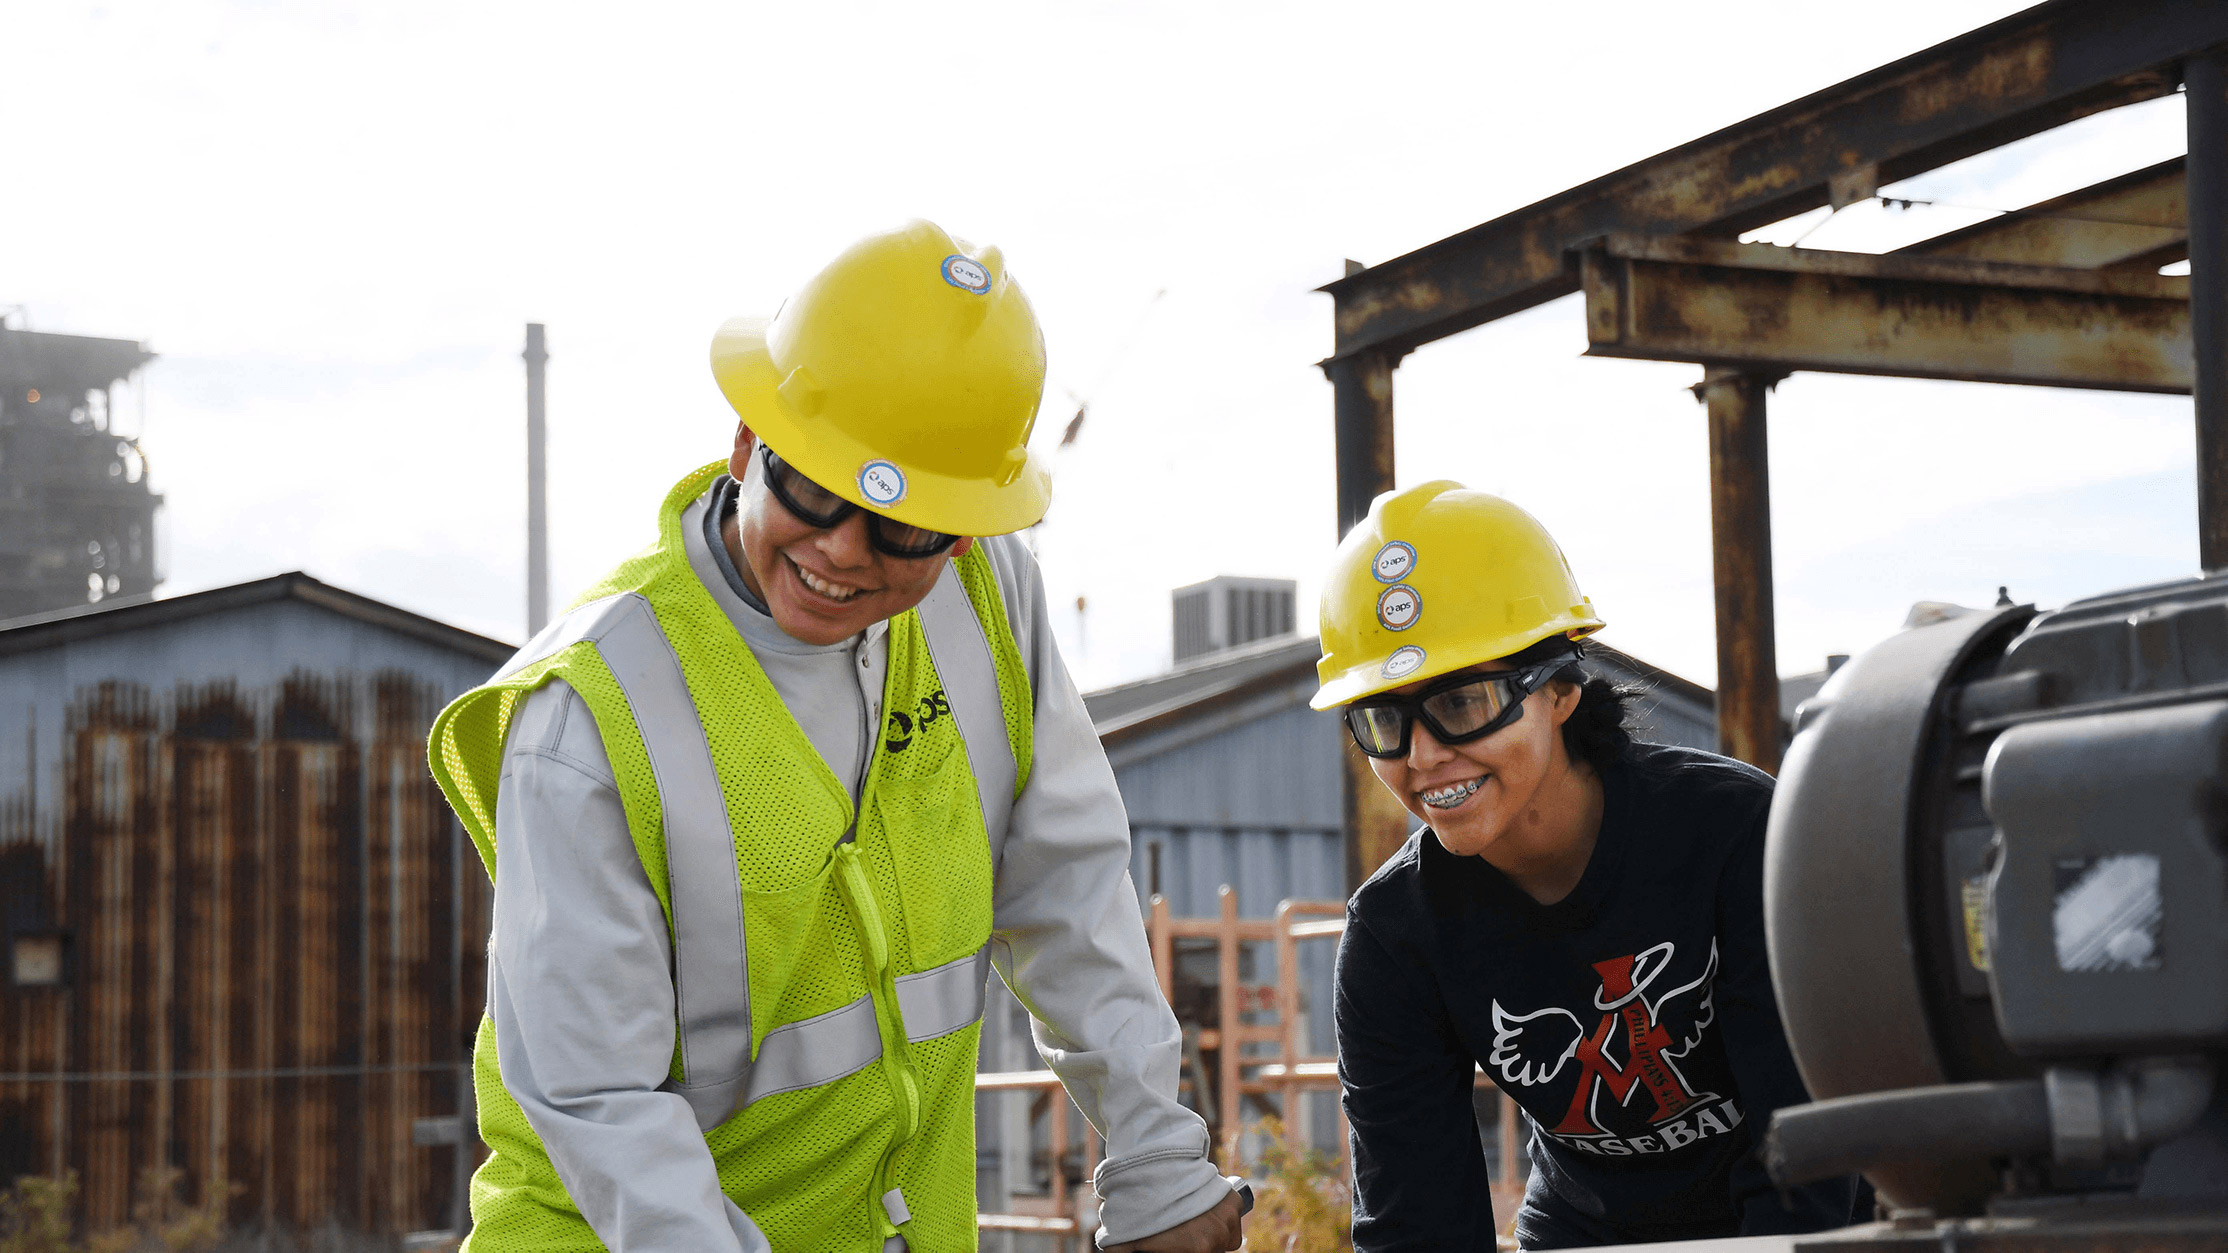 Two APS employees smiling while working at a power plant.